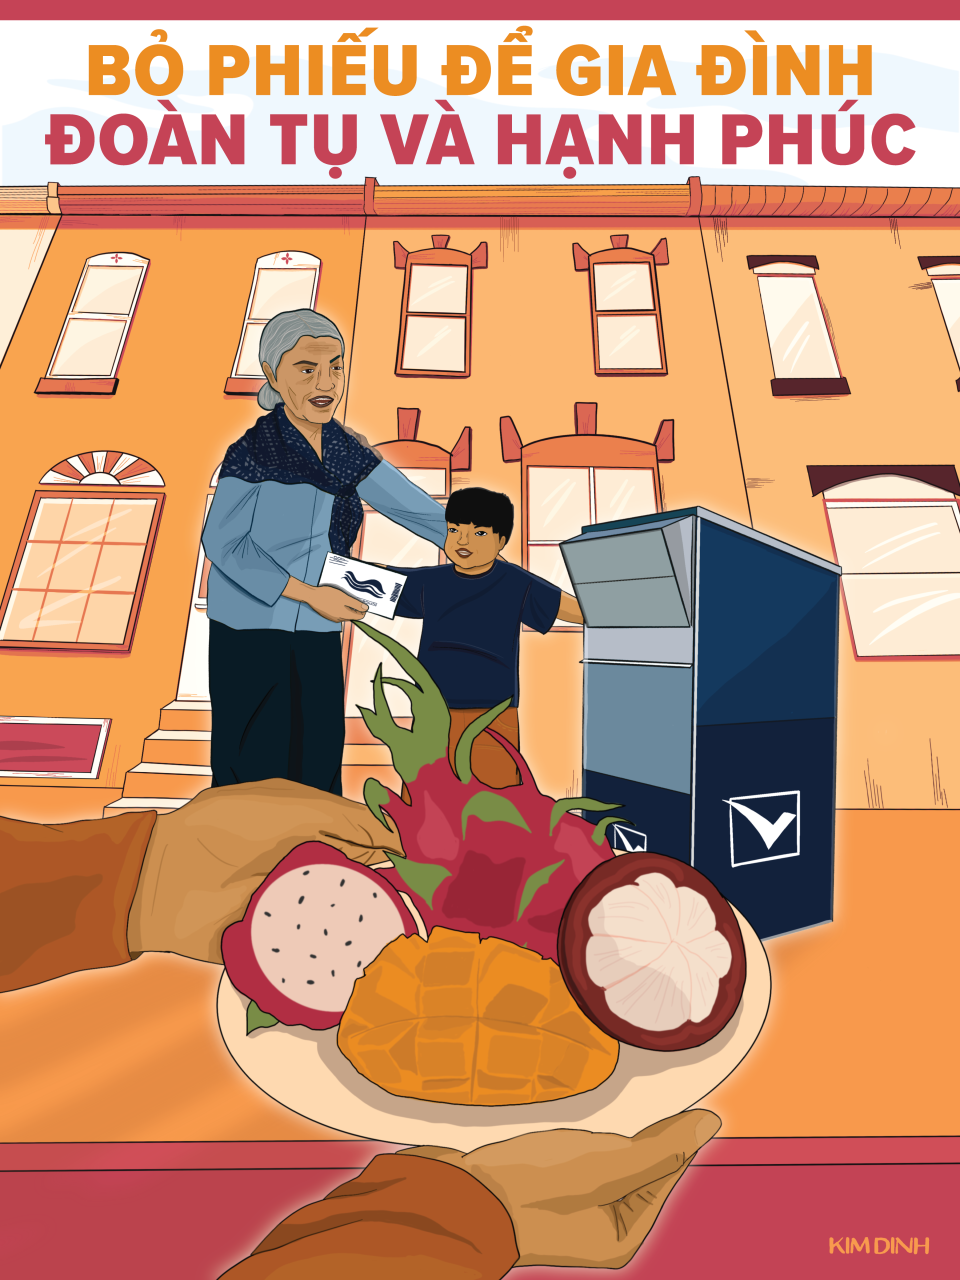 A poster by Kim Dinh, with the viewer holding a plate of fruit including mango, dragonfruit, and lychee as a mother and son drop a ballot in a ballot drop box in the background. In Vietnamese, the title reads "Vote for our families' dignity, unity, and joy"